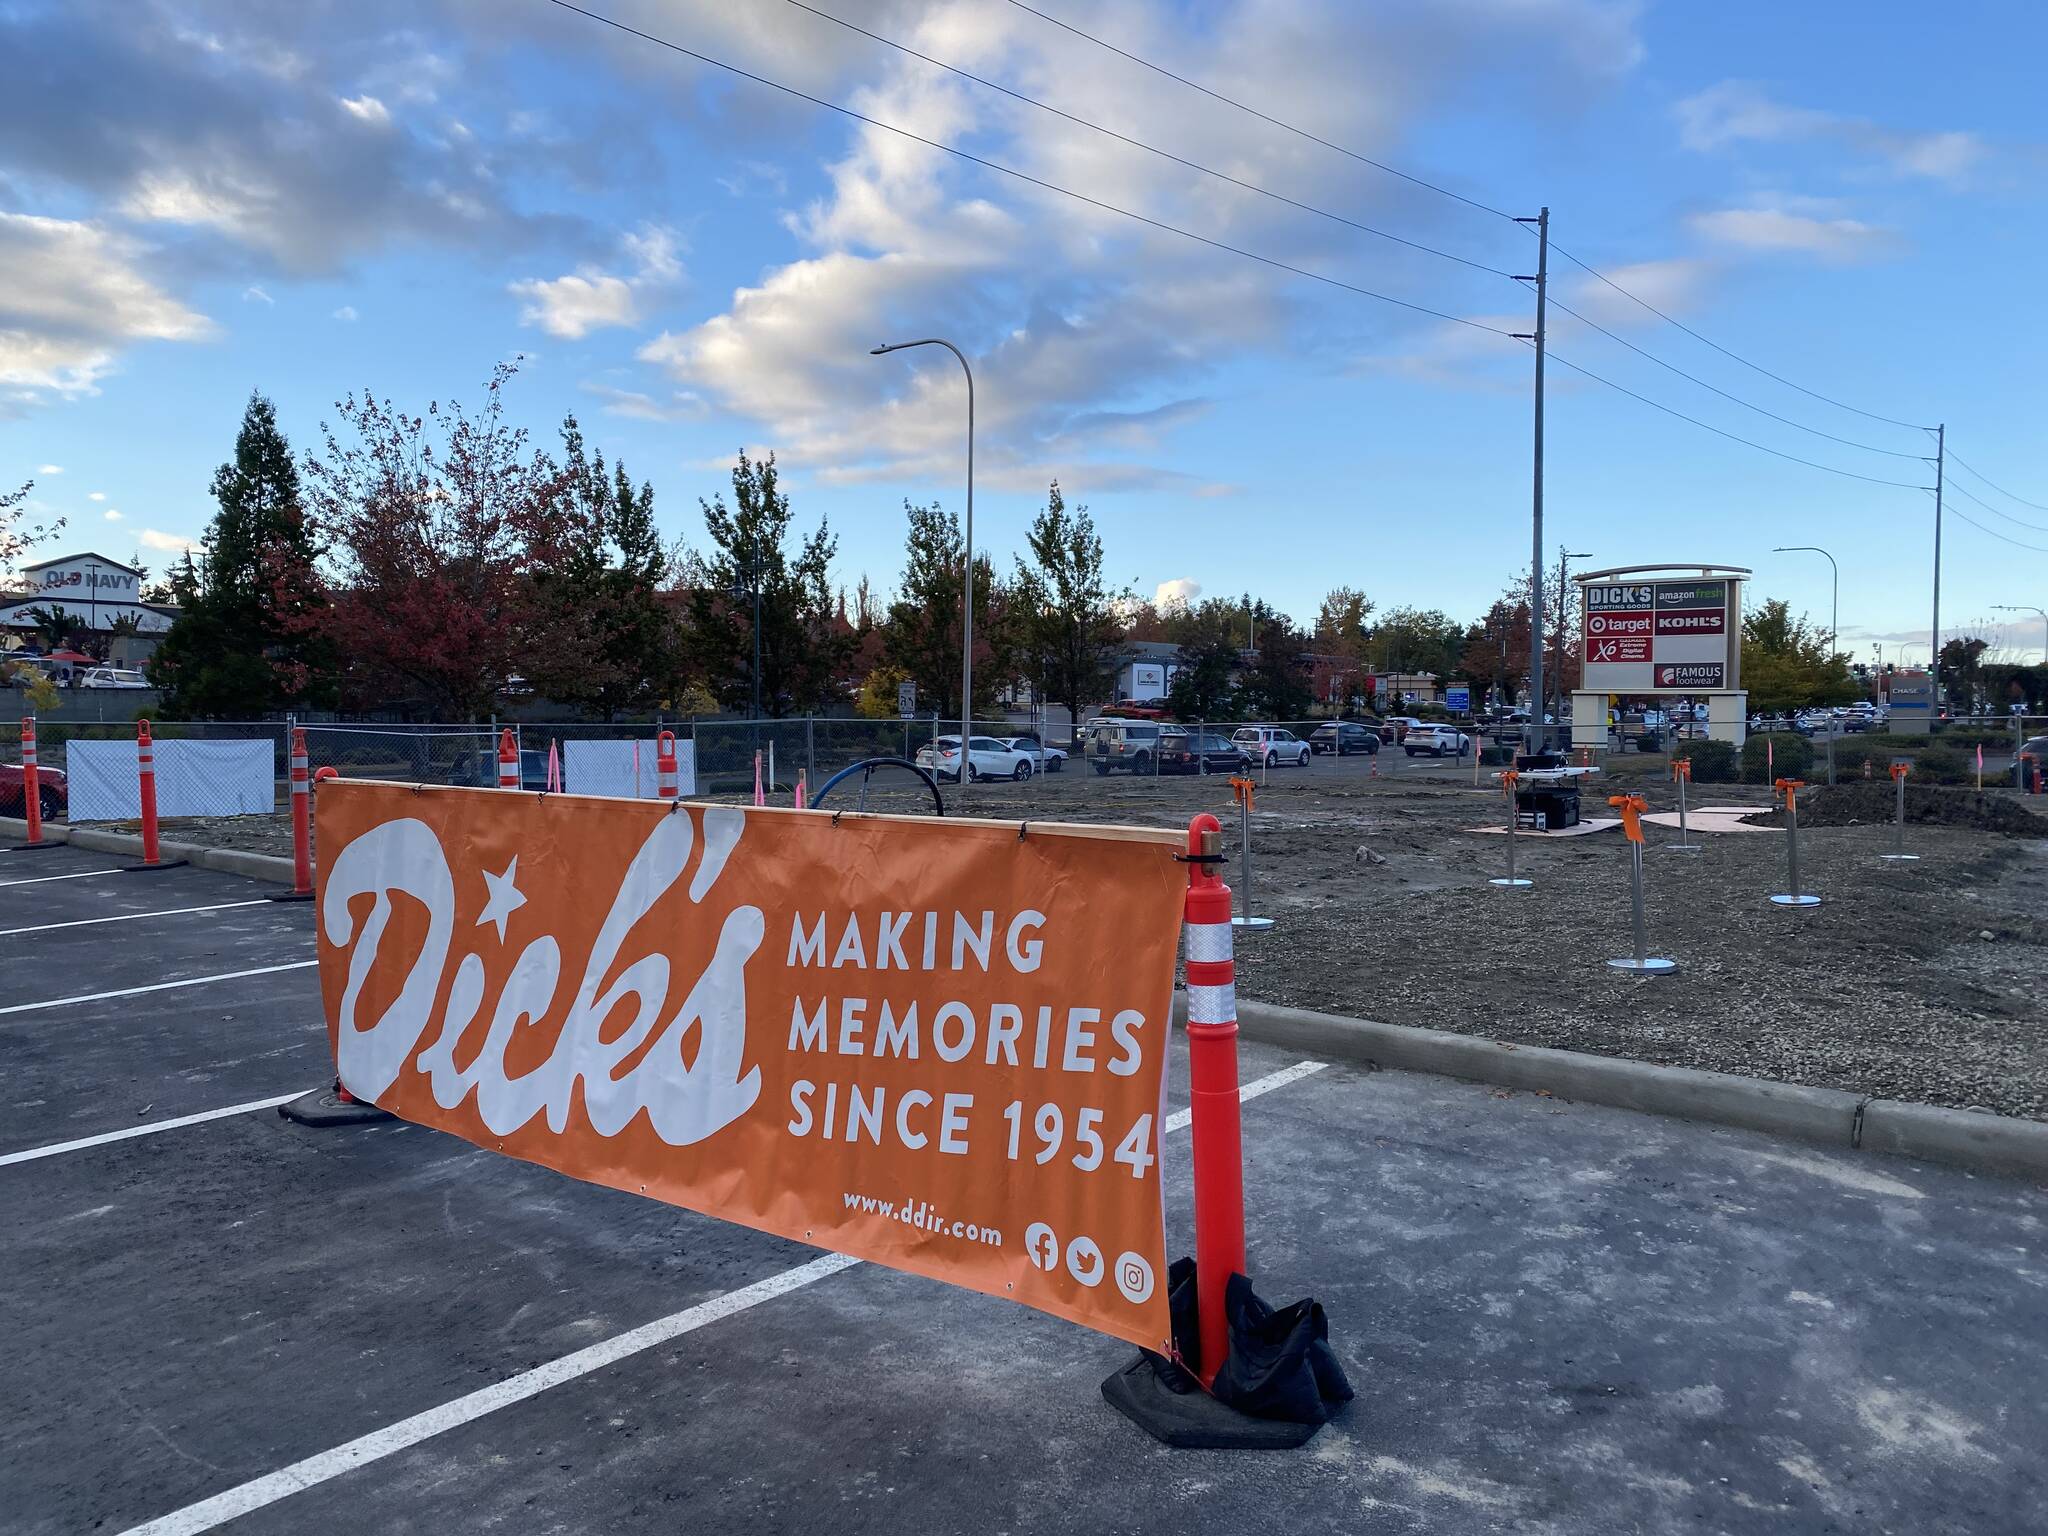 The site of the new Dick’s Drive-In location sits on the west side of The Commons mall along Pacific Highway South in Federal Way. Olivia Sullivan/the Mirror